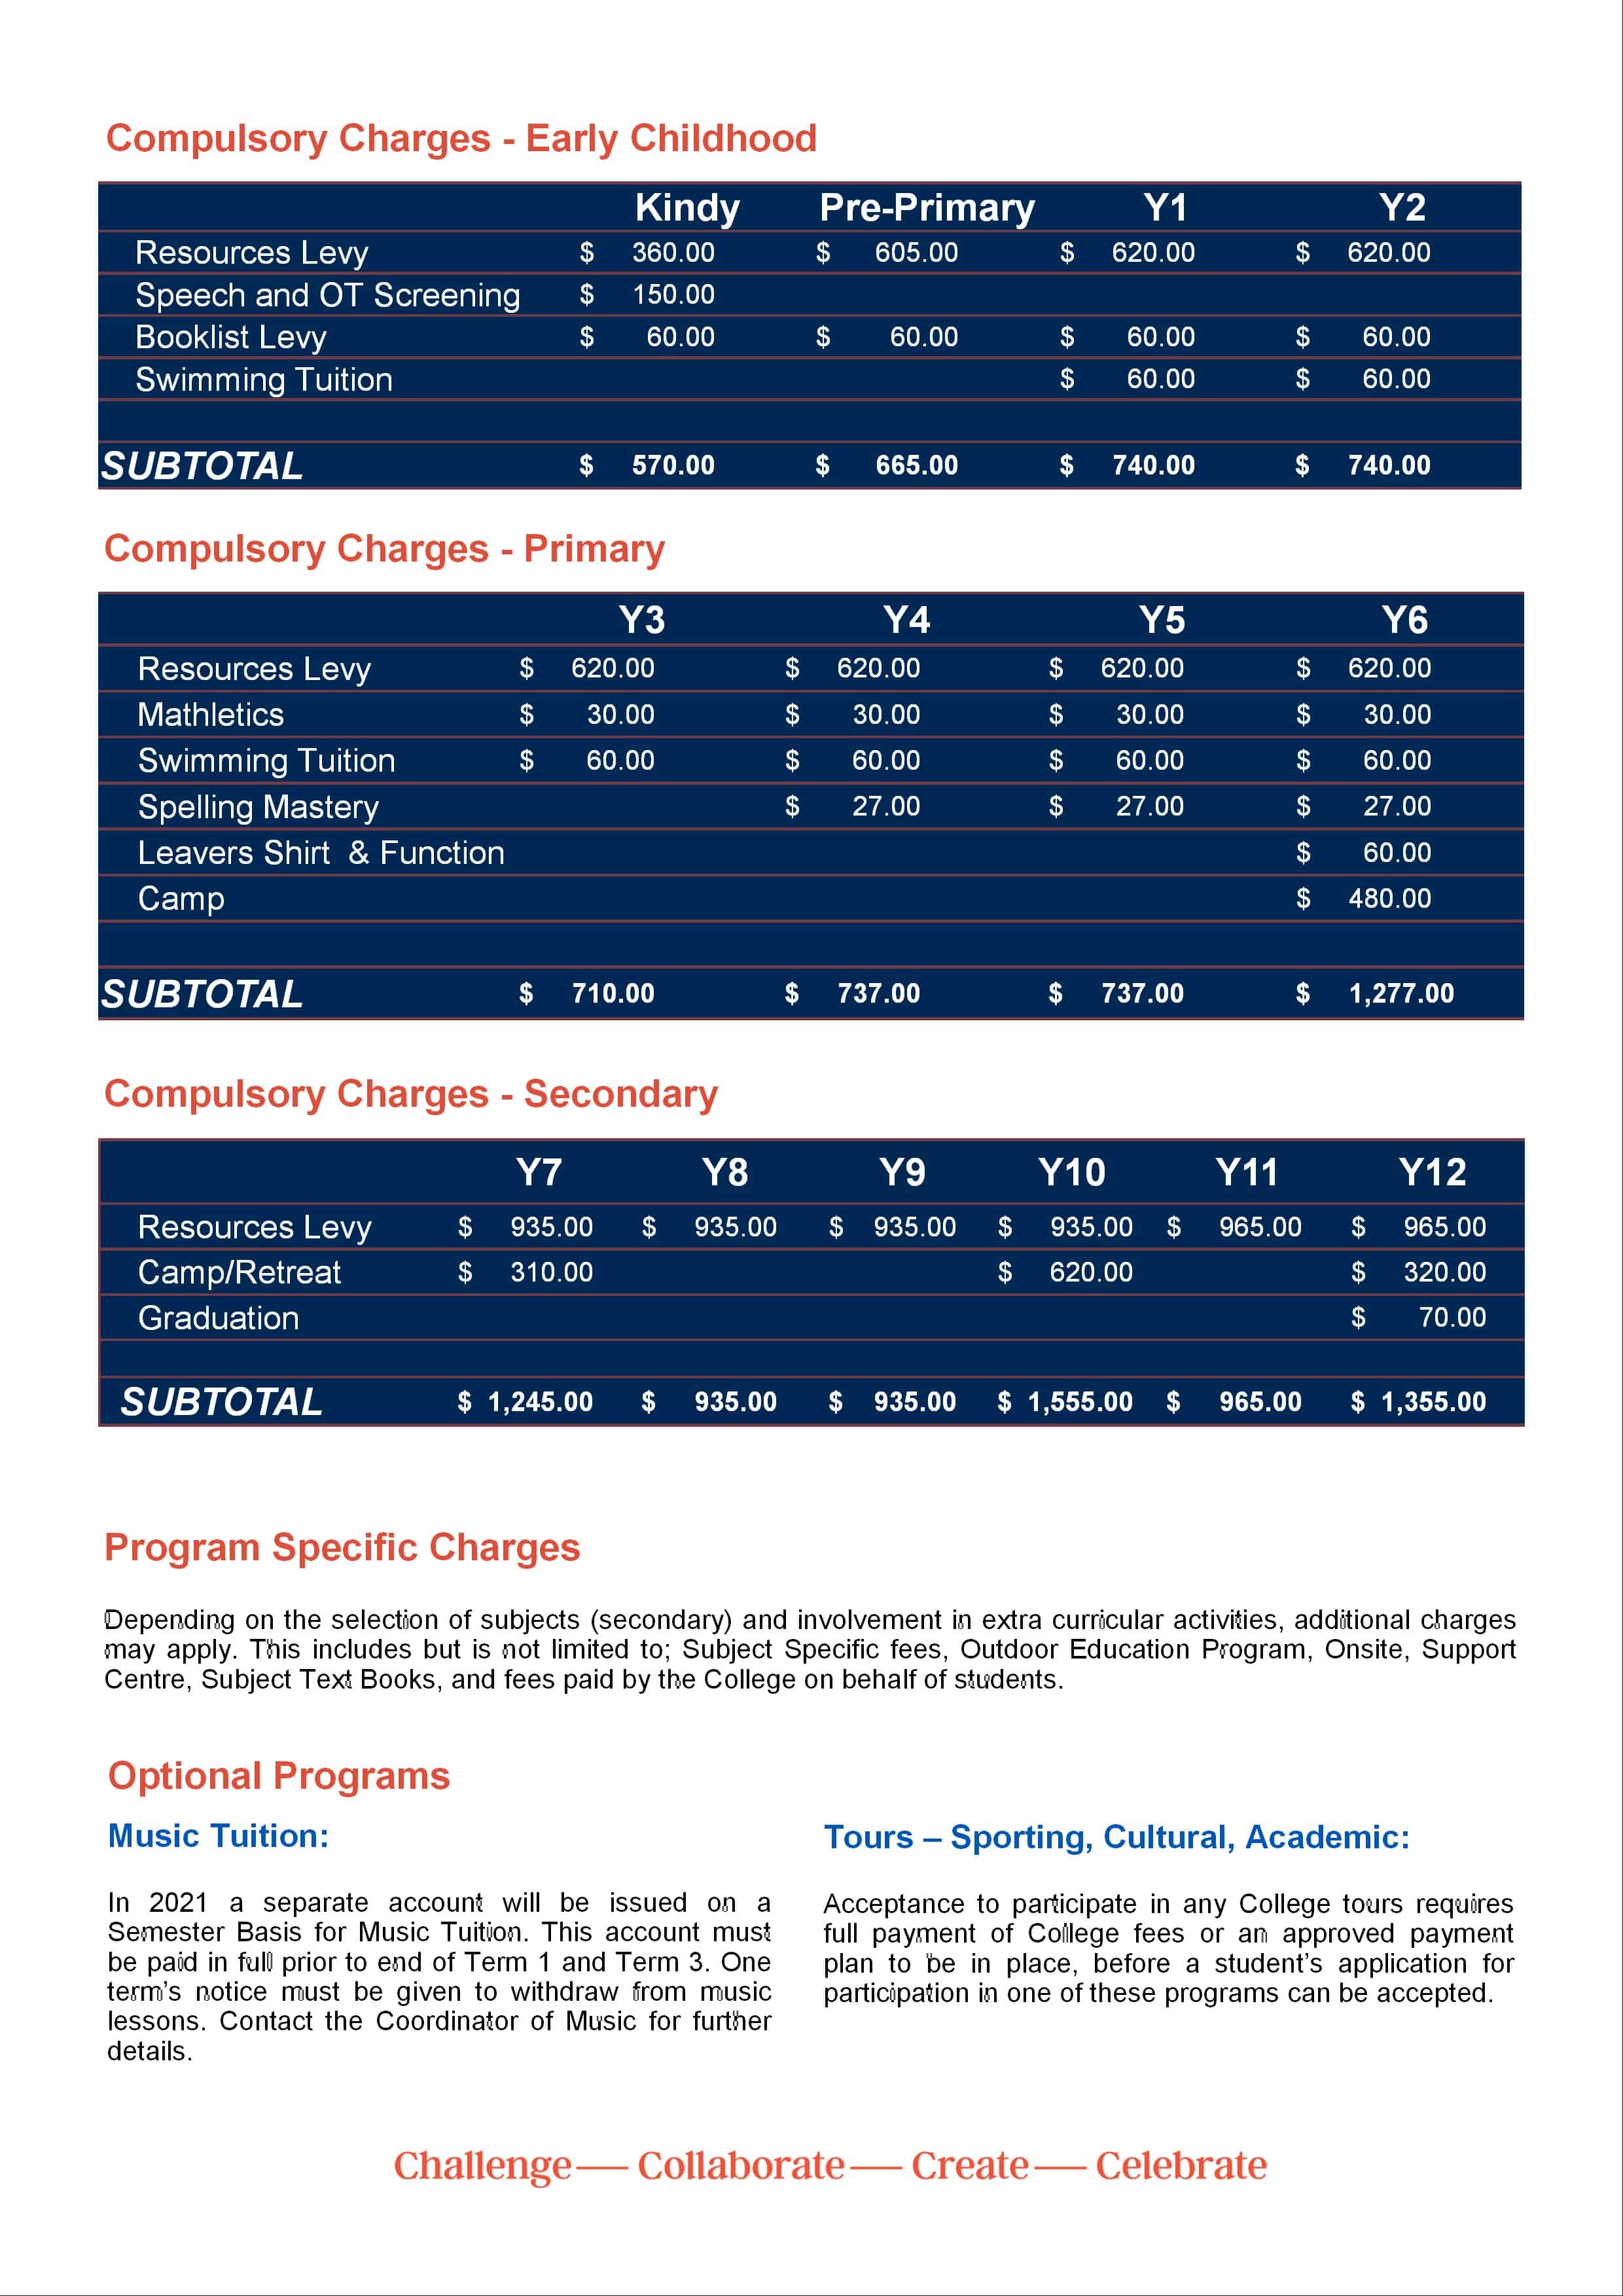 Newman College 2021 Fees and Charges PDF